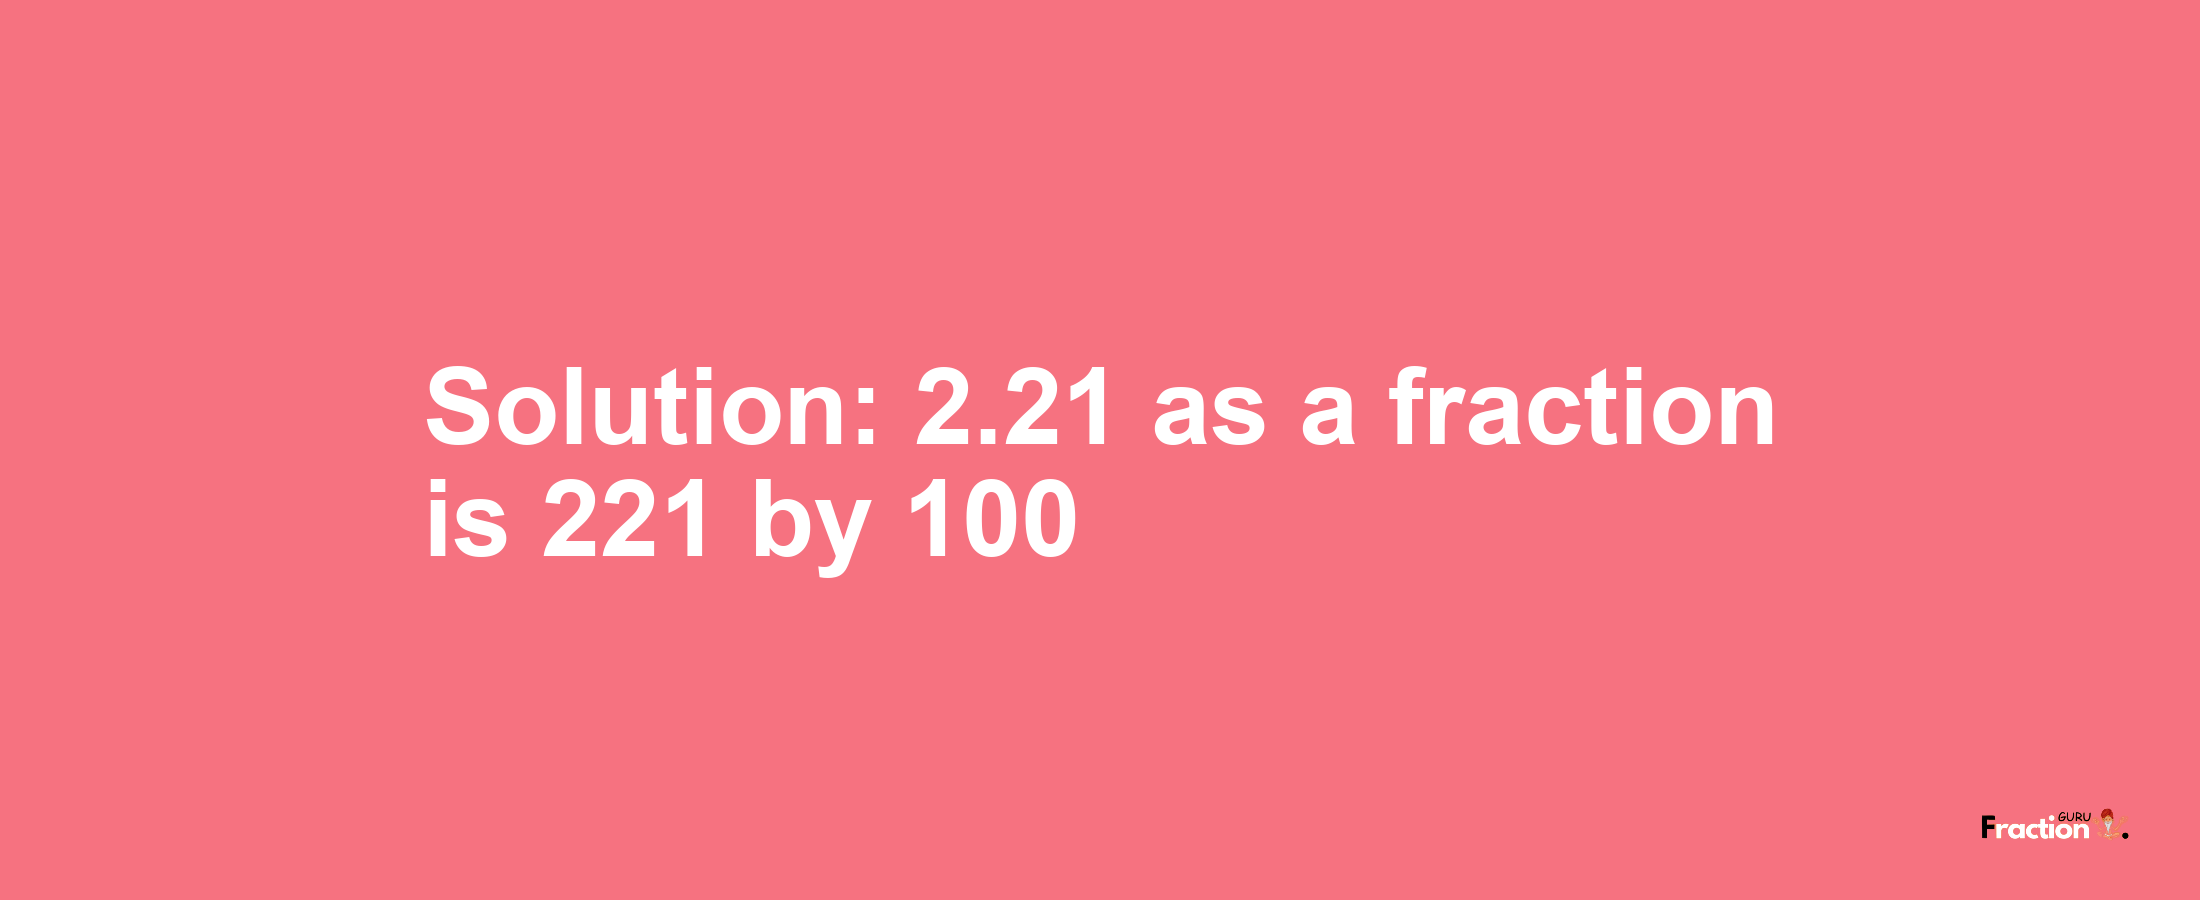 Solution:2.21 as a fraction is 221/100